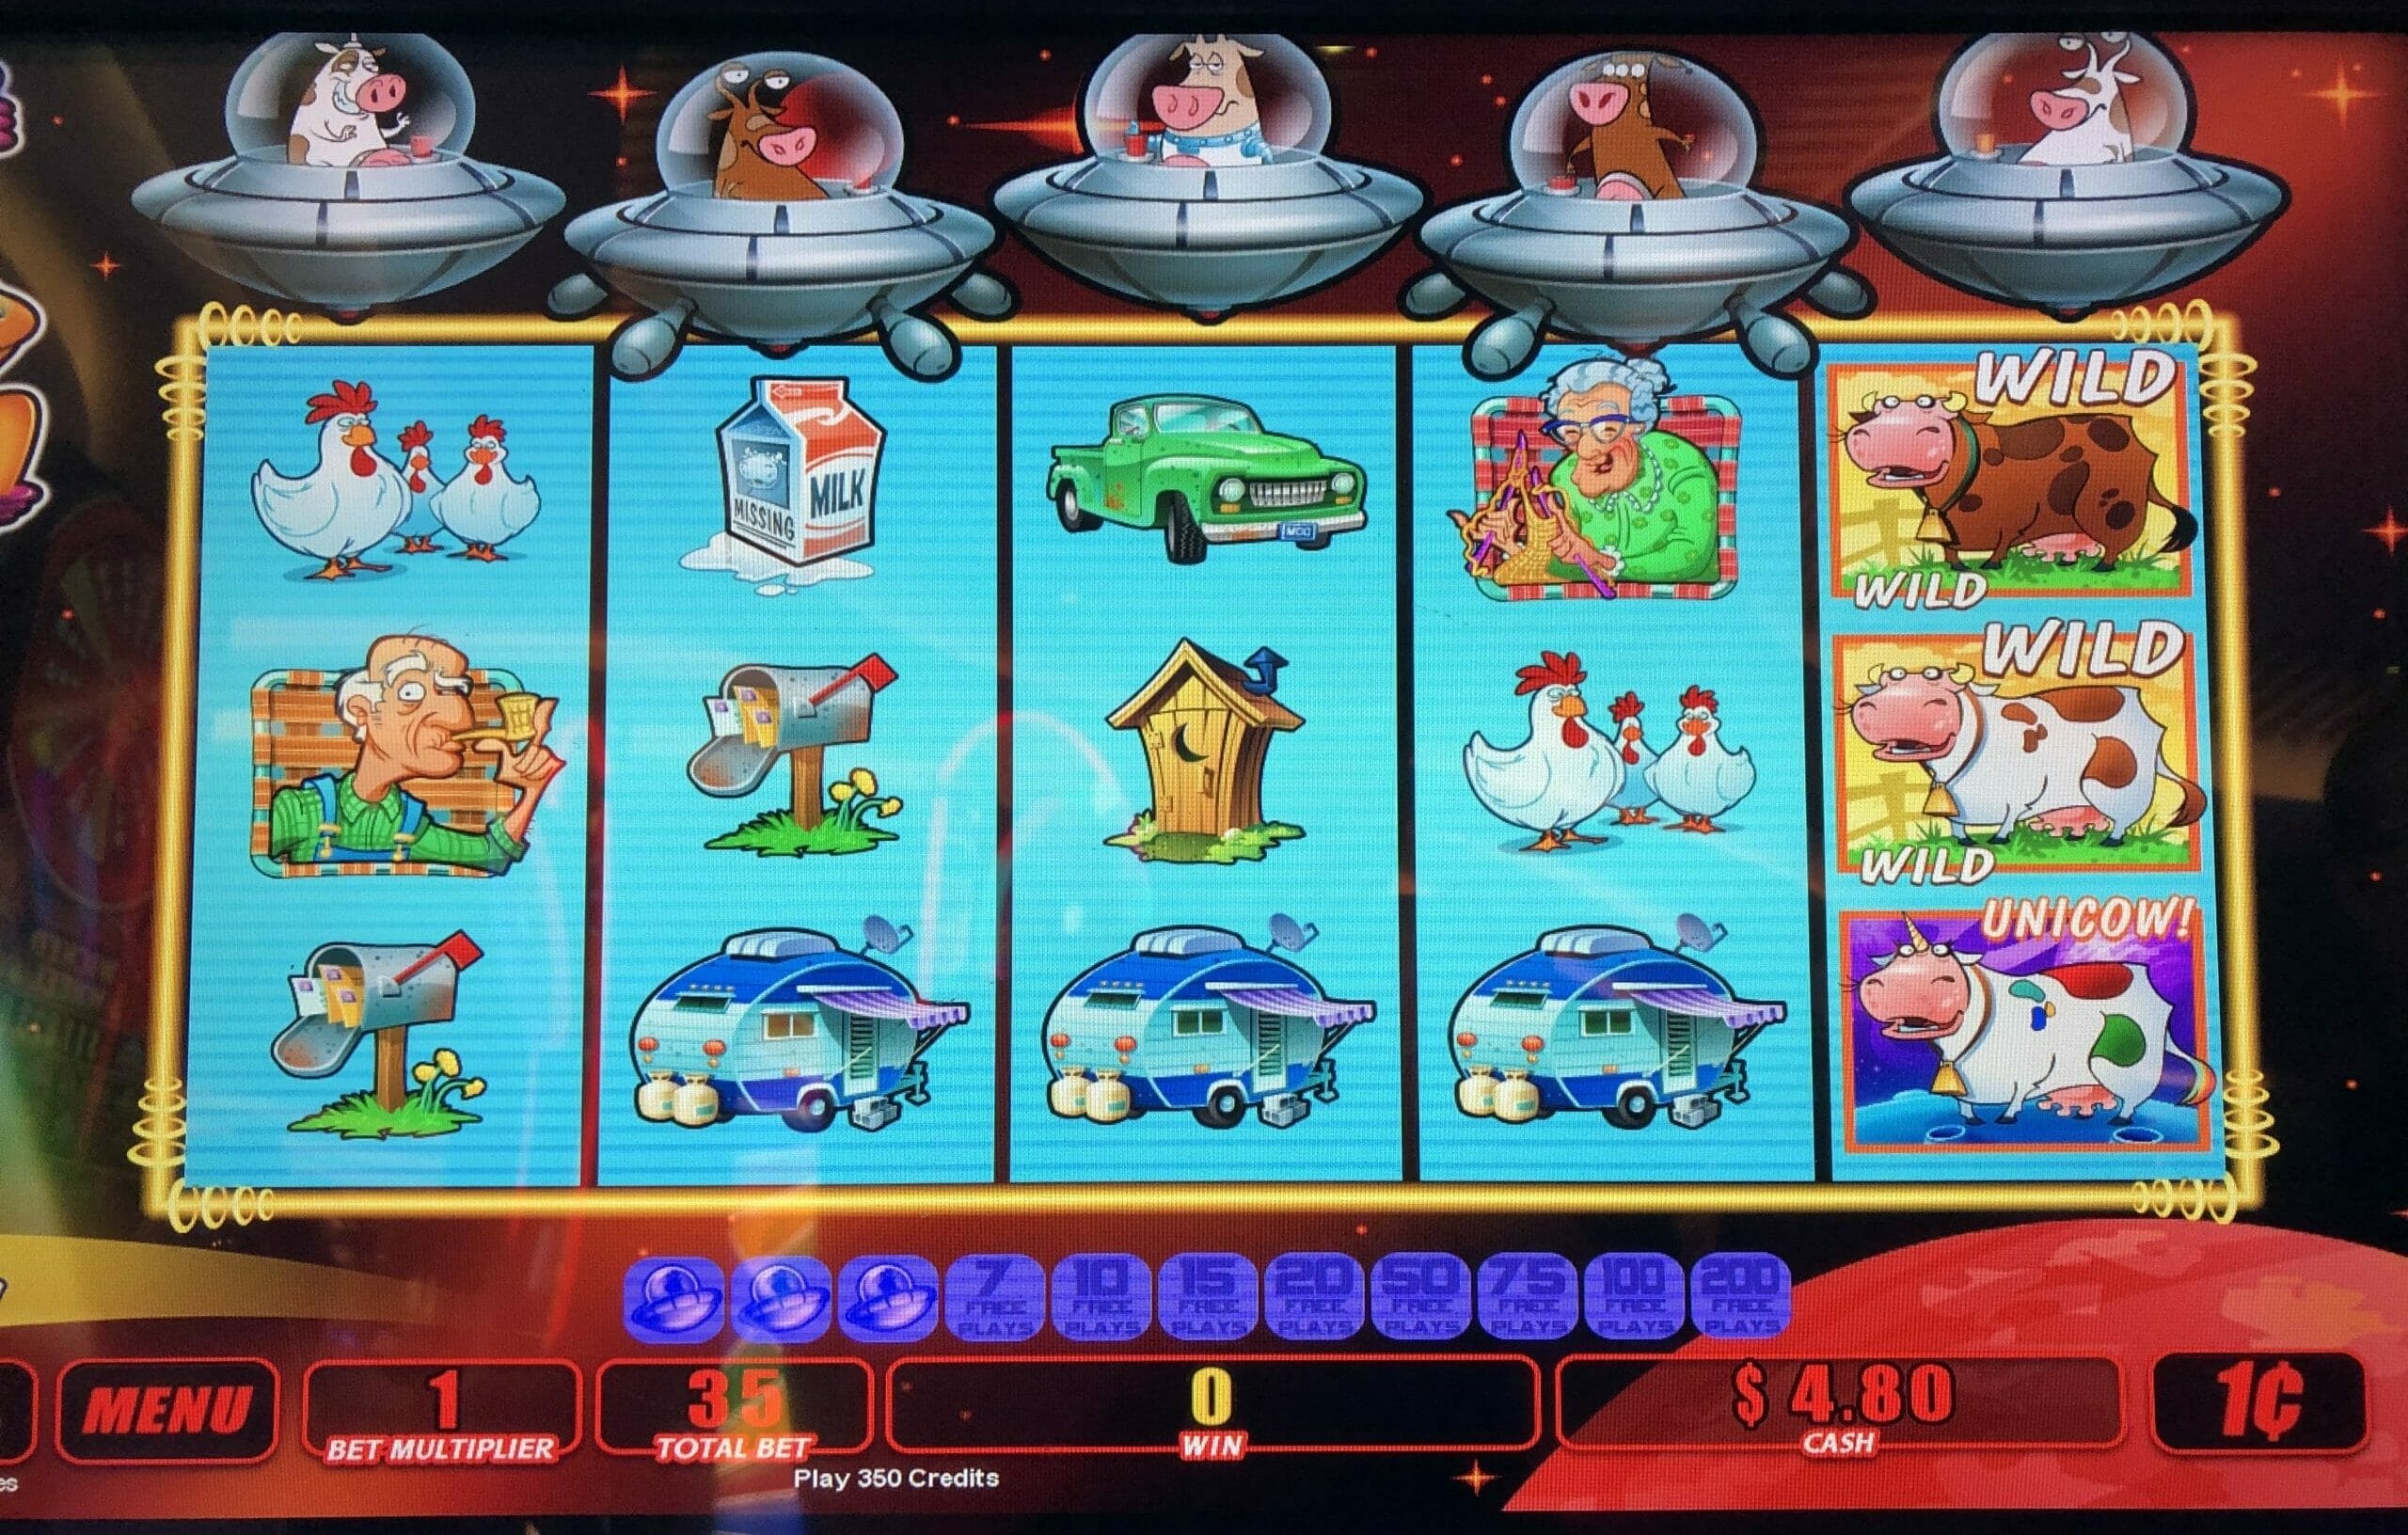 invaders from the planet moolah slot rtp